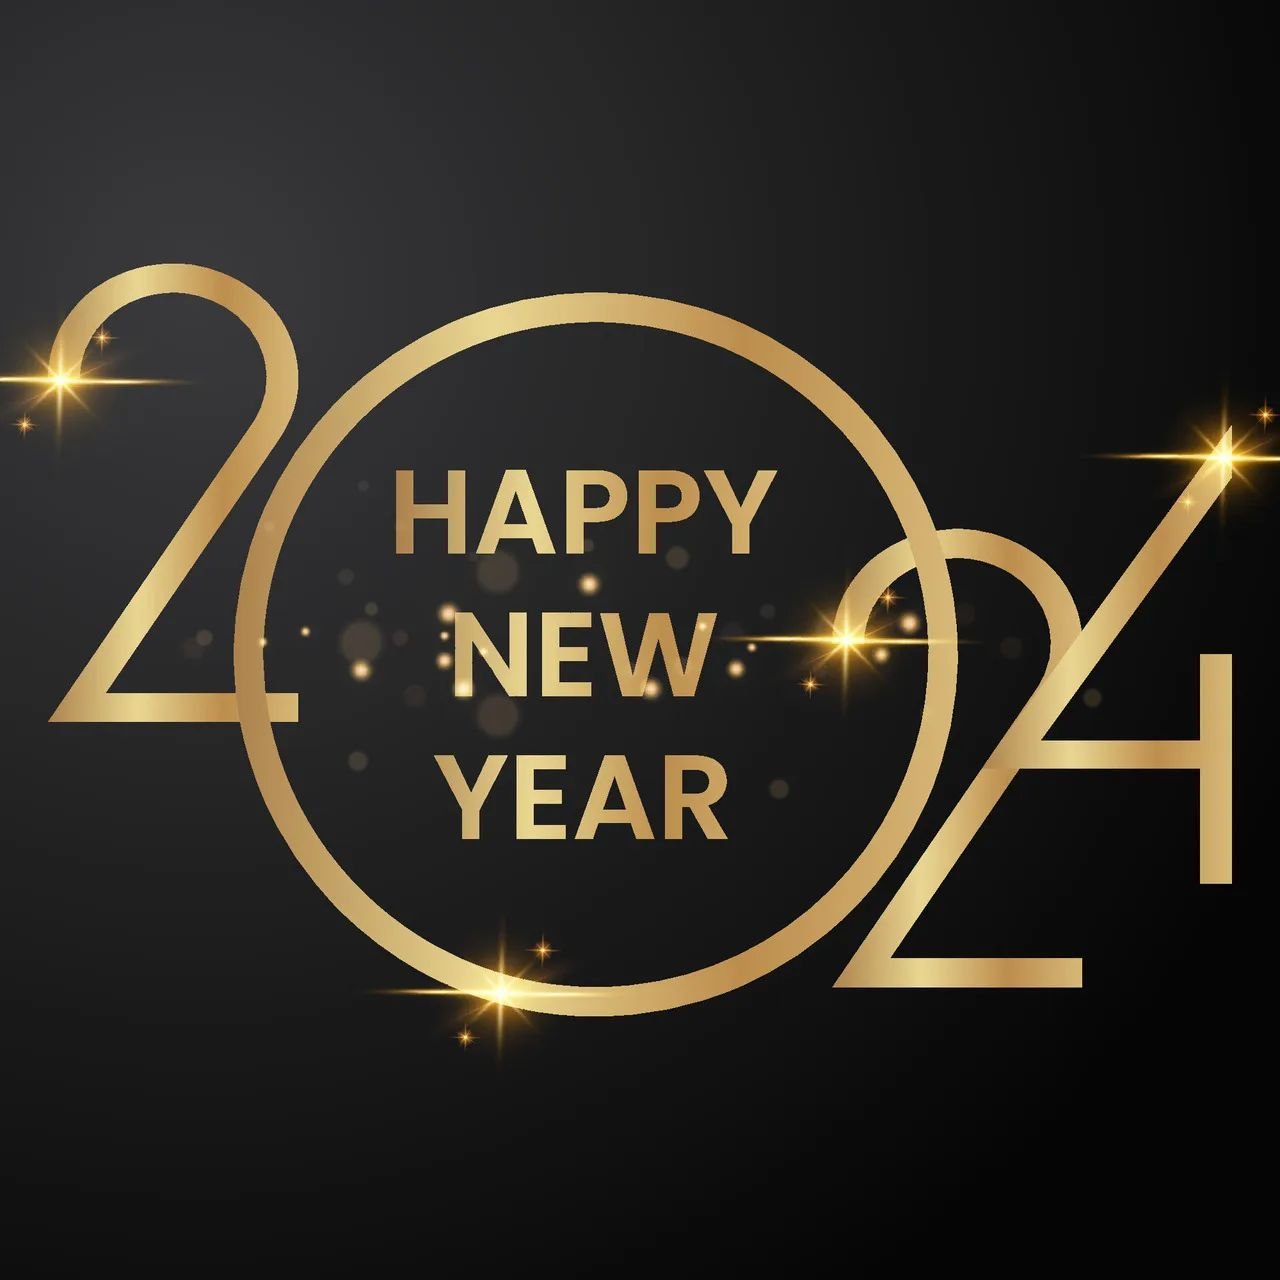 Wishing you all a happy and healthy 2024 🎆

We look forward to seeing our regular hirers and our one-off hirers using the centre, whether it's for classes, parties or using our snooker hall 🫶